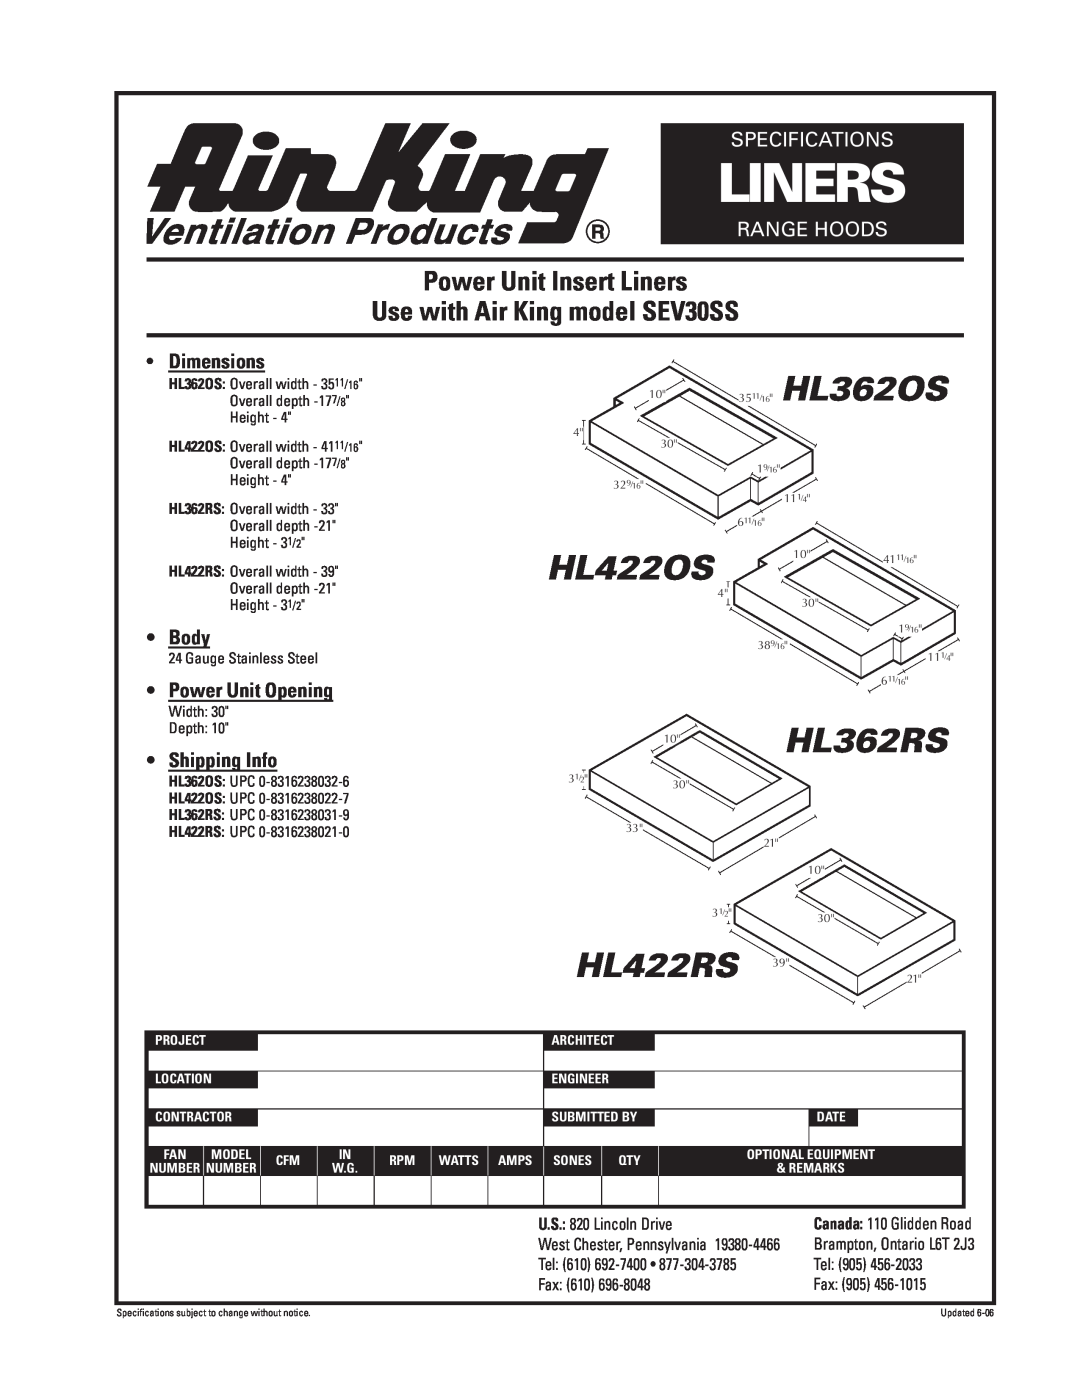 Air King specifications 3511/16HL362OS, HL422OS, 10HL362RS, HL422RS, Power Unit Insert Liners, Specifications, Body 